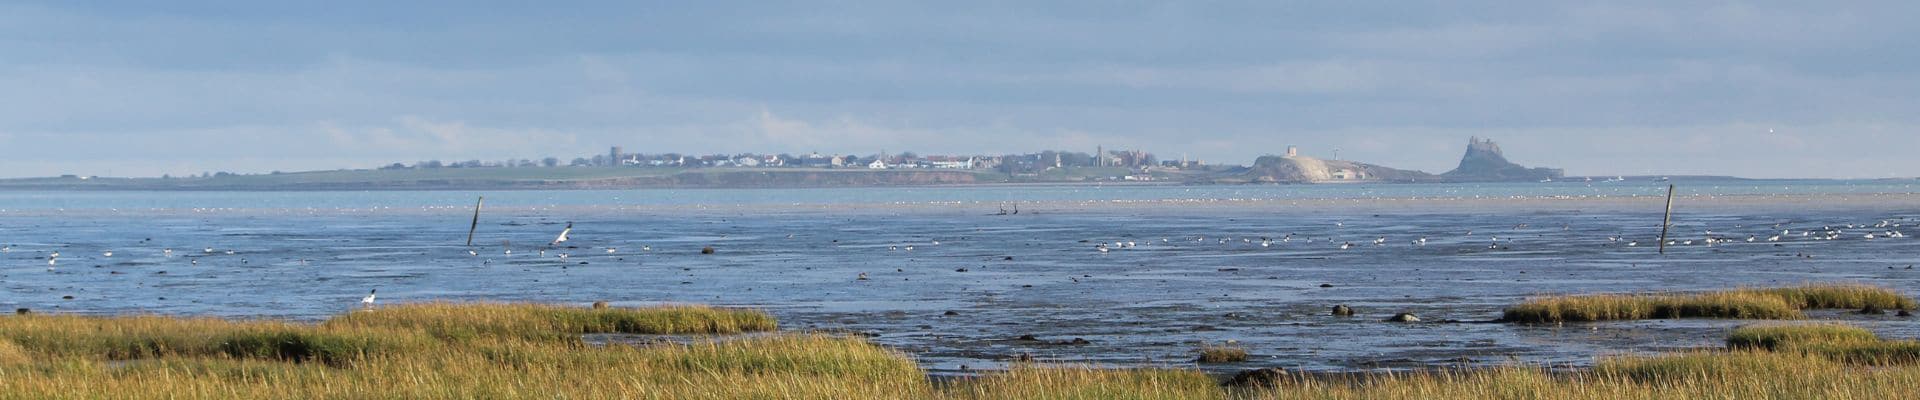 Wildfowling at Lindisfarne - an unmissable opportunity